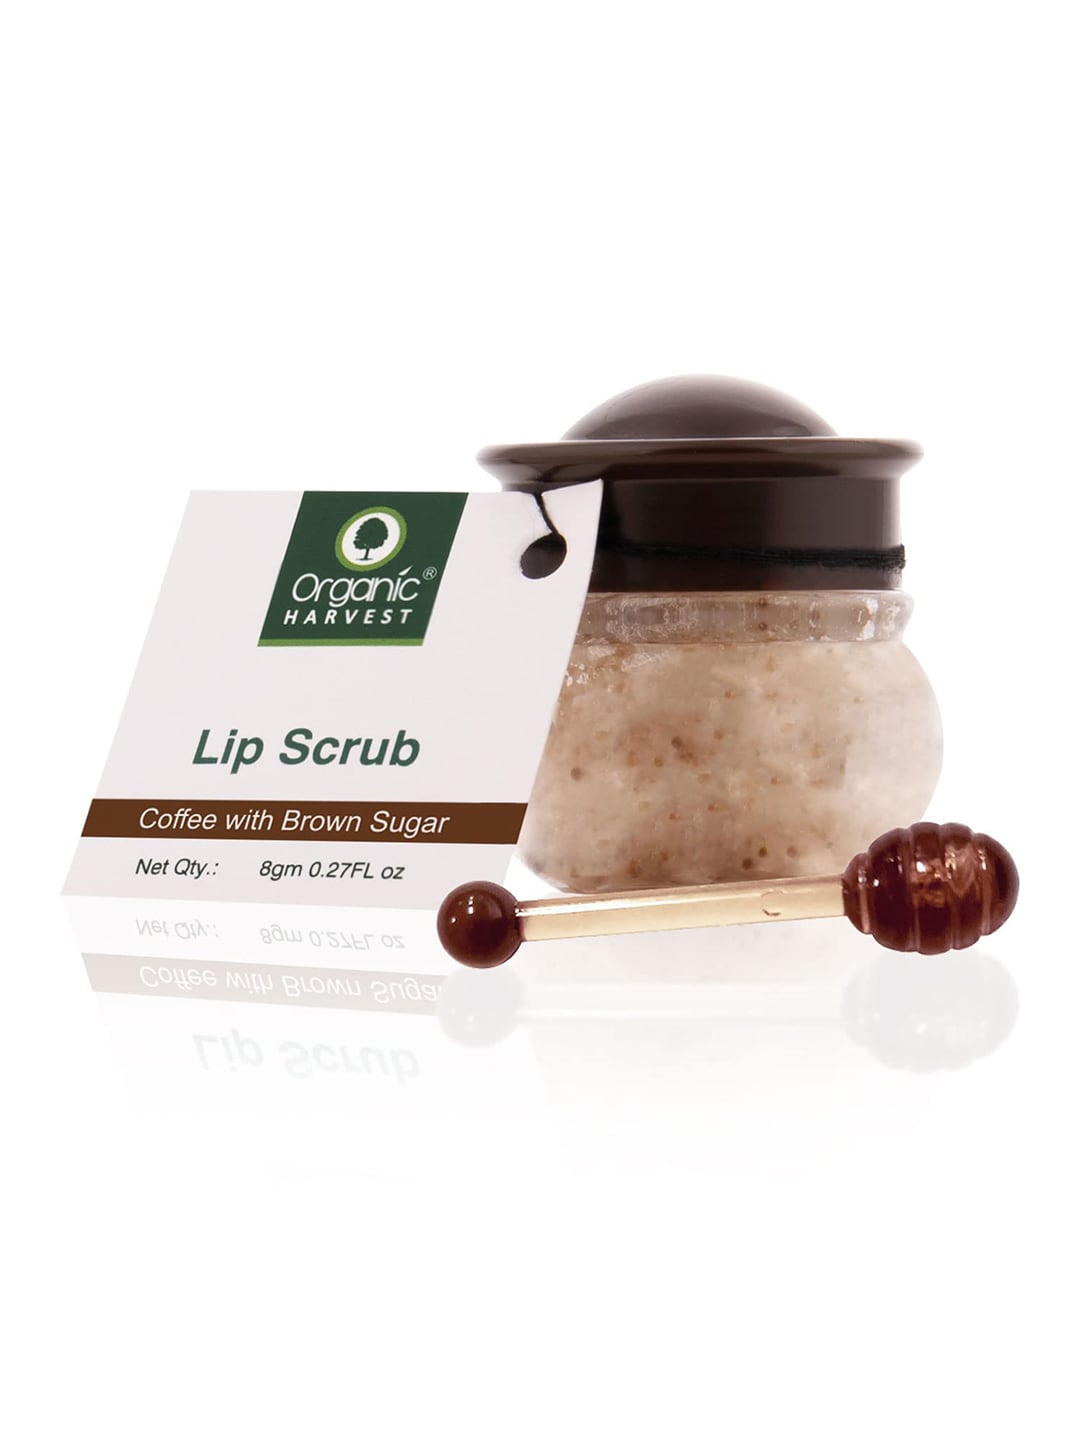 Organic Harvest Lip Scrub with Coffee & Brown Sugar for Exfoliation - 8g Price in India